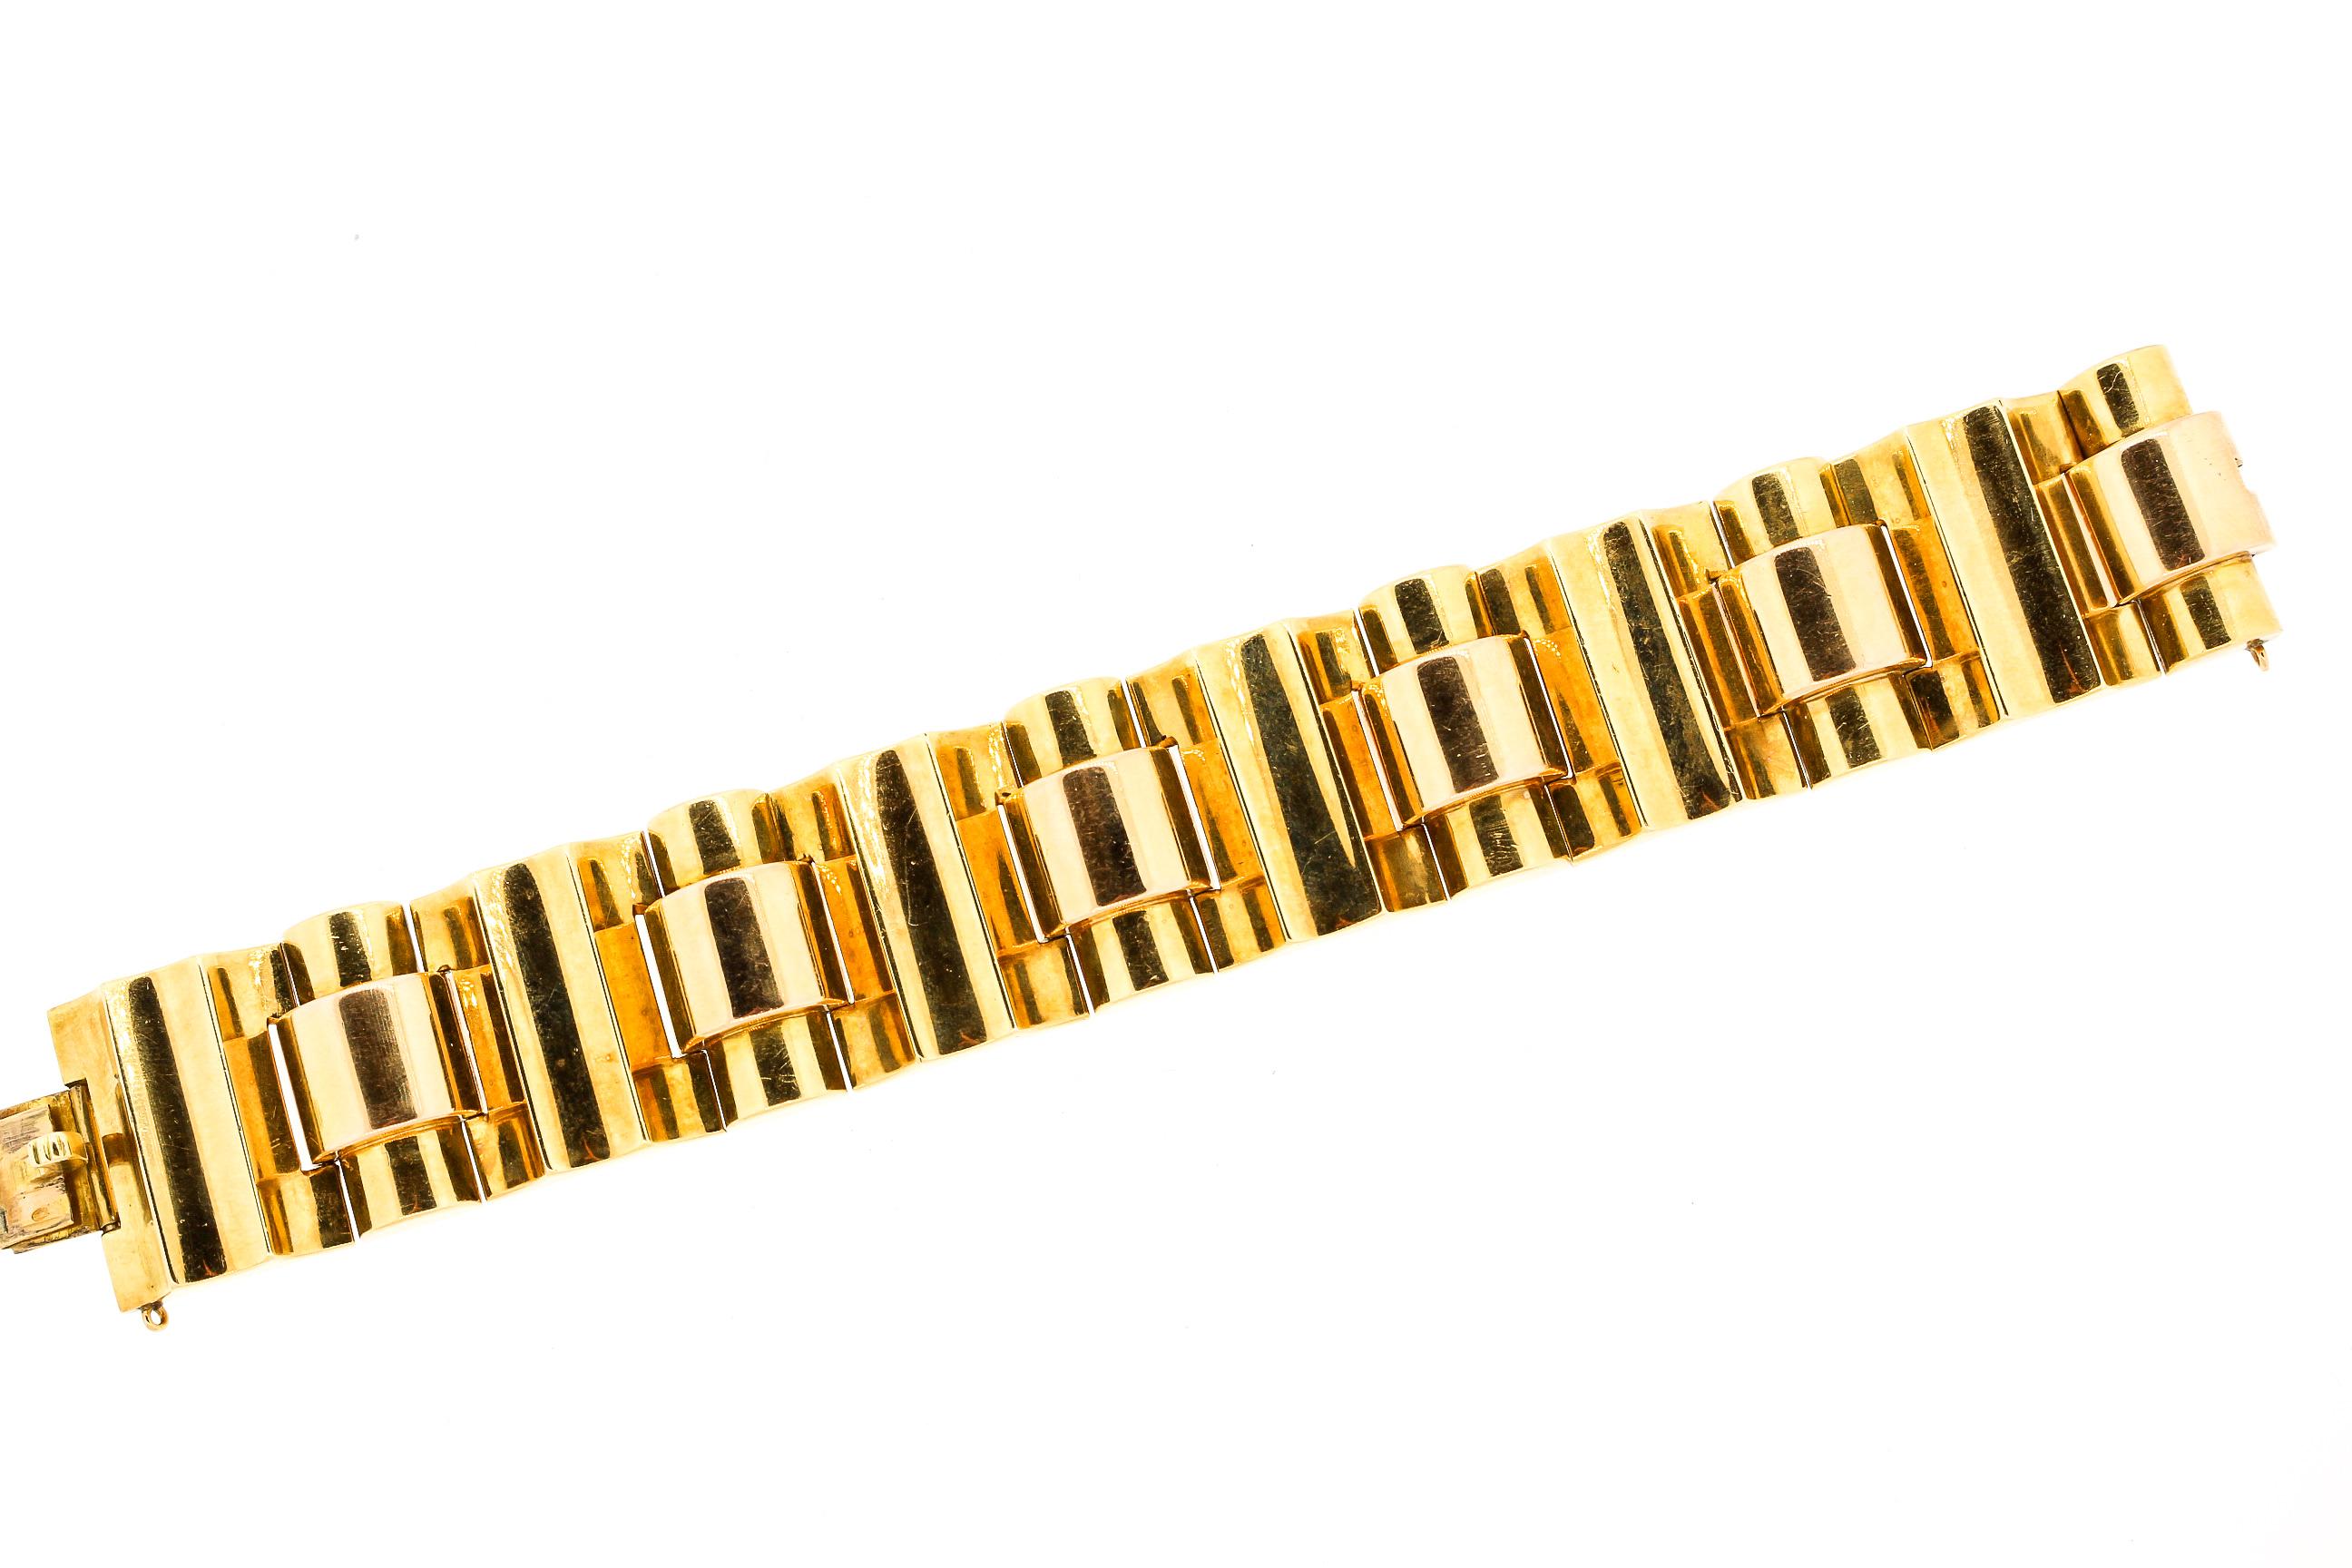 A bold wide 18k gold modernist Retro two tone bracelet. This bracelet has considerable heft and feels luxurious to wear. The bracelet link is slightly contrasted between yellow and rose gold. This is a classic Retro Tank bracelet. During World War